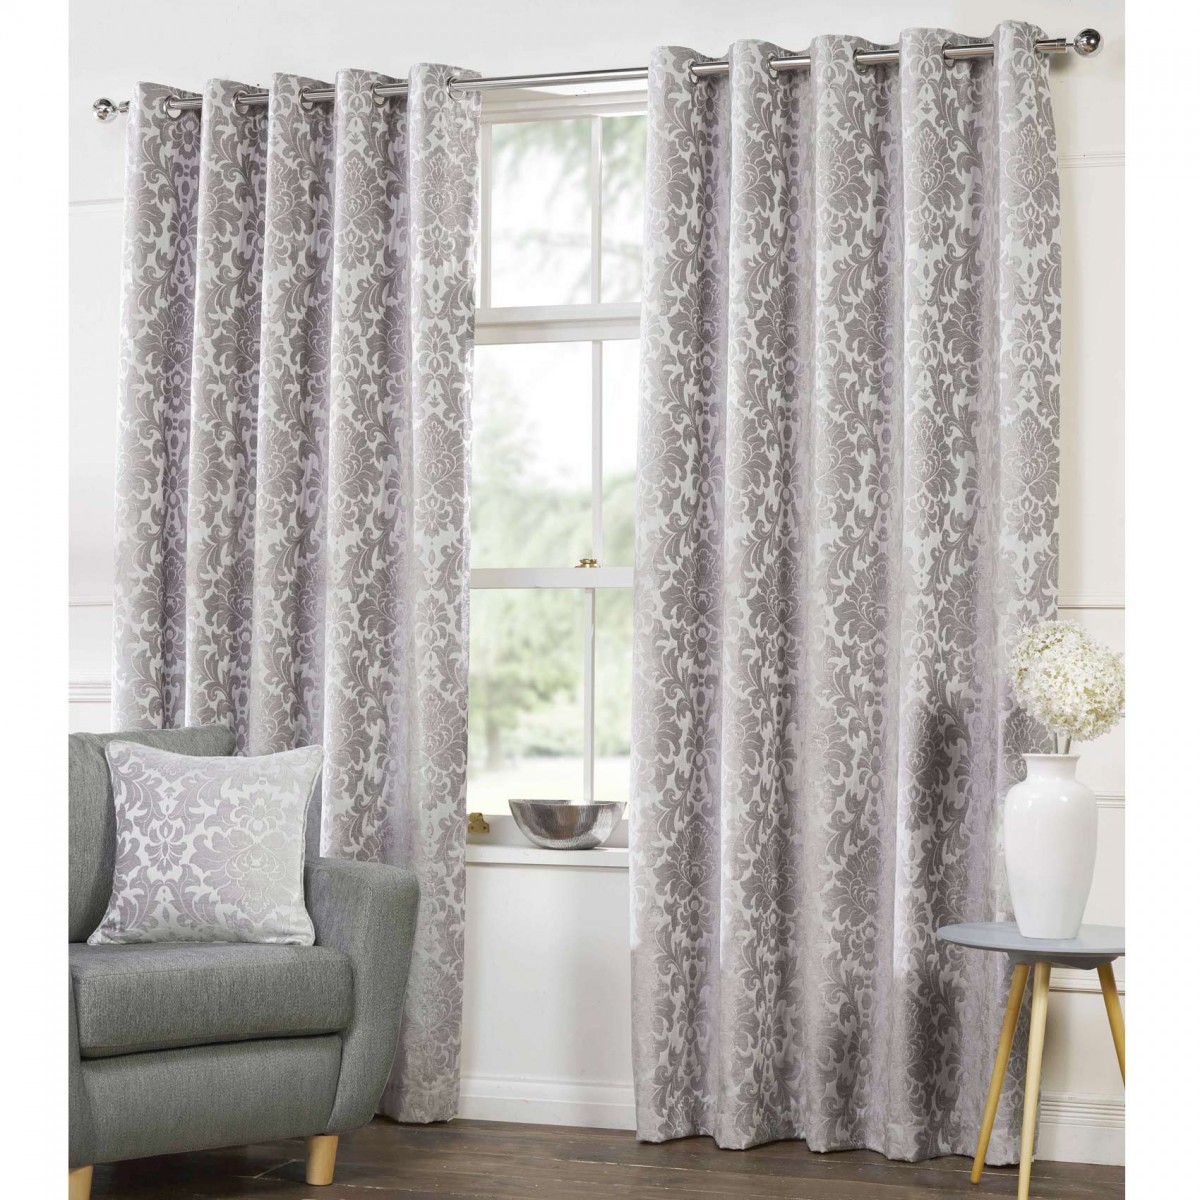 silver curtains 40% off camden damask woven chenille lined eyelet curtains - silver PJKPNDS